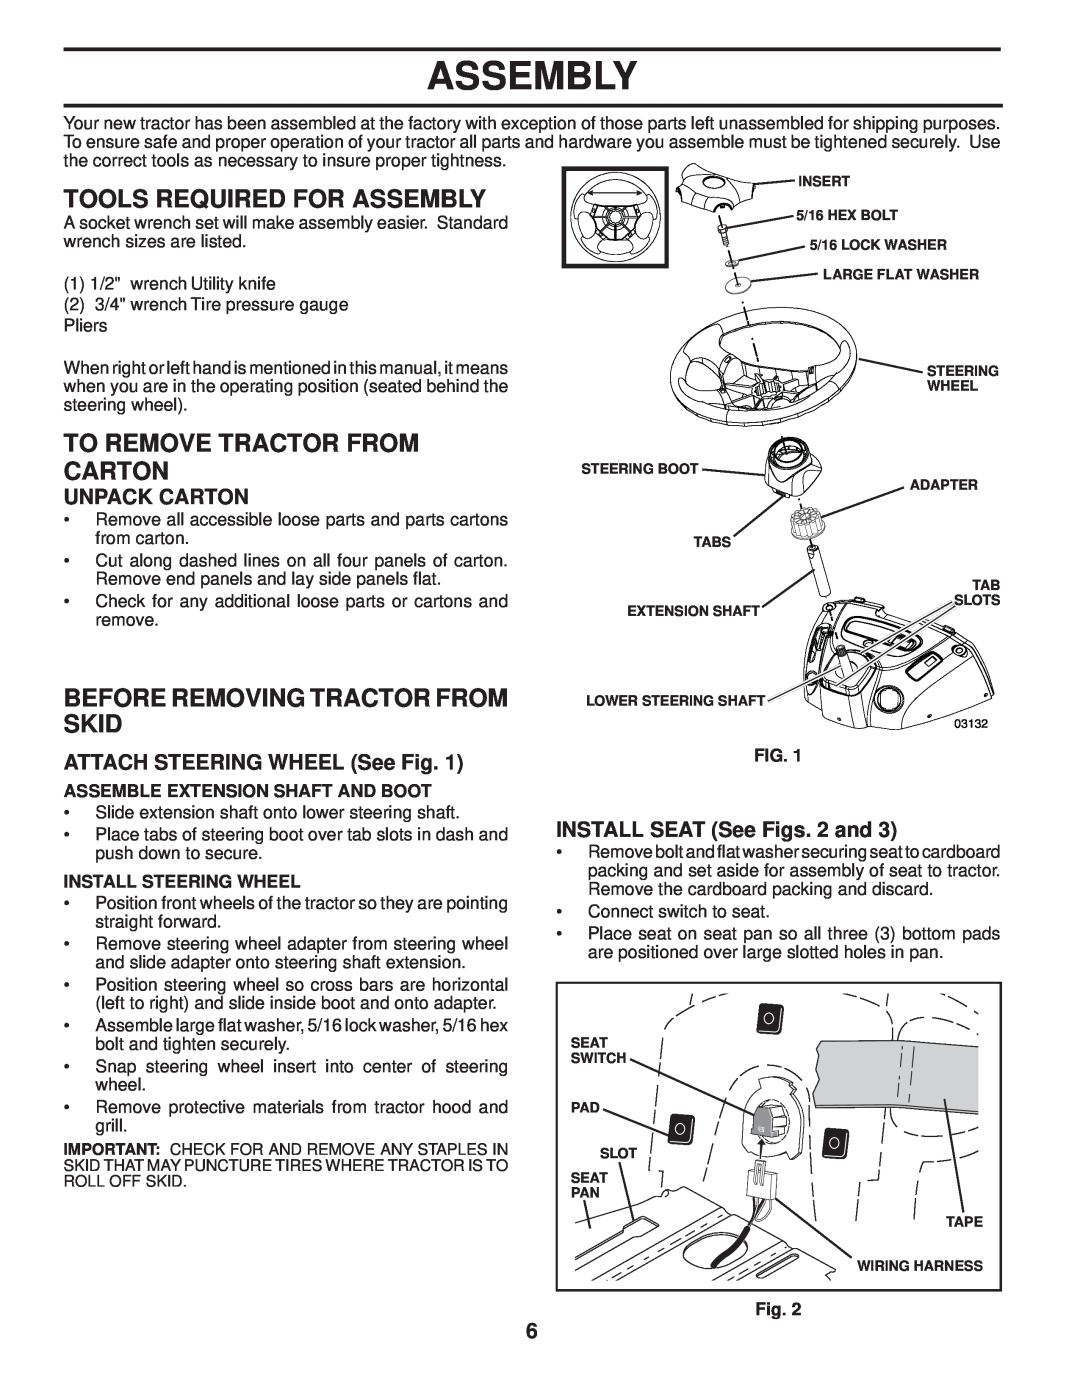 Poulan 411274 manual Tools Required For Assembly, To Remove Tractor From Carton, Before Removing Tractor From Skid 